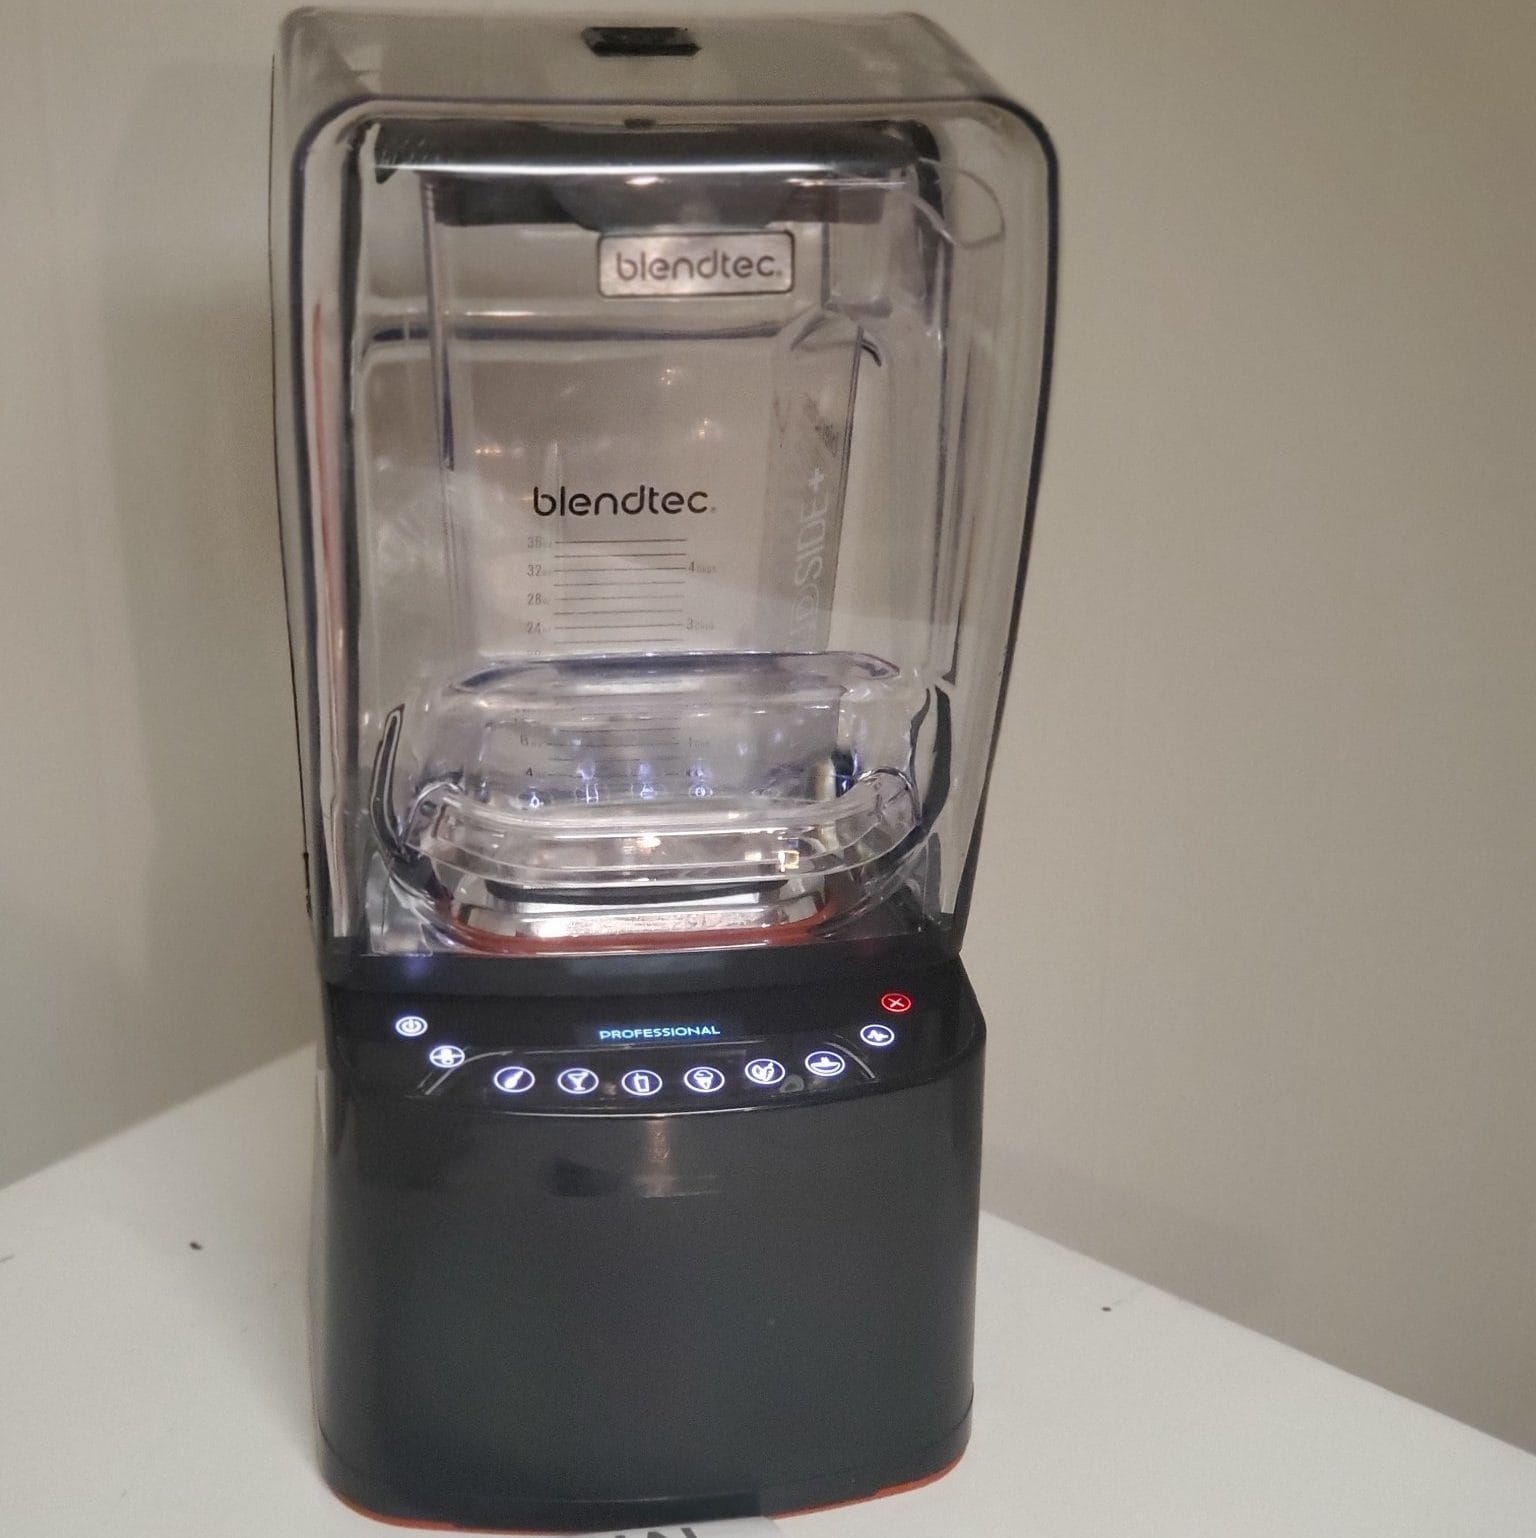 Blendtec 800 is designed to be extremely modern and convenient